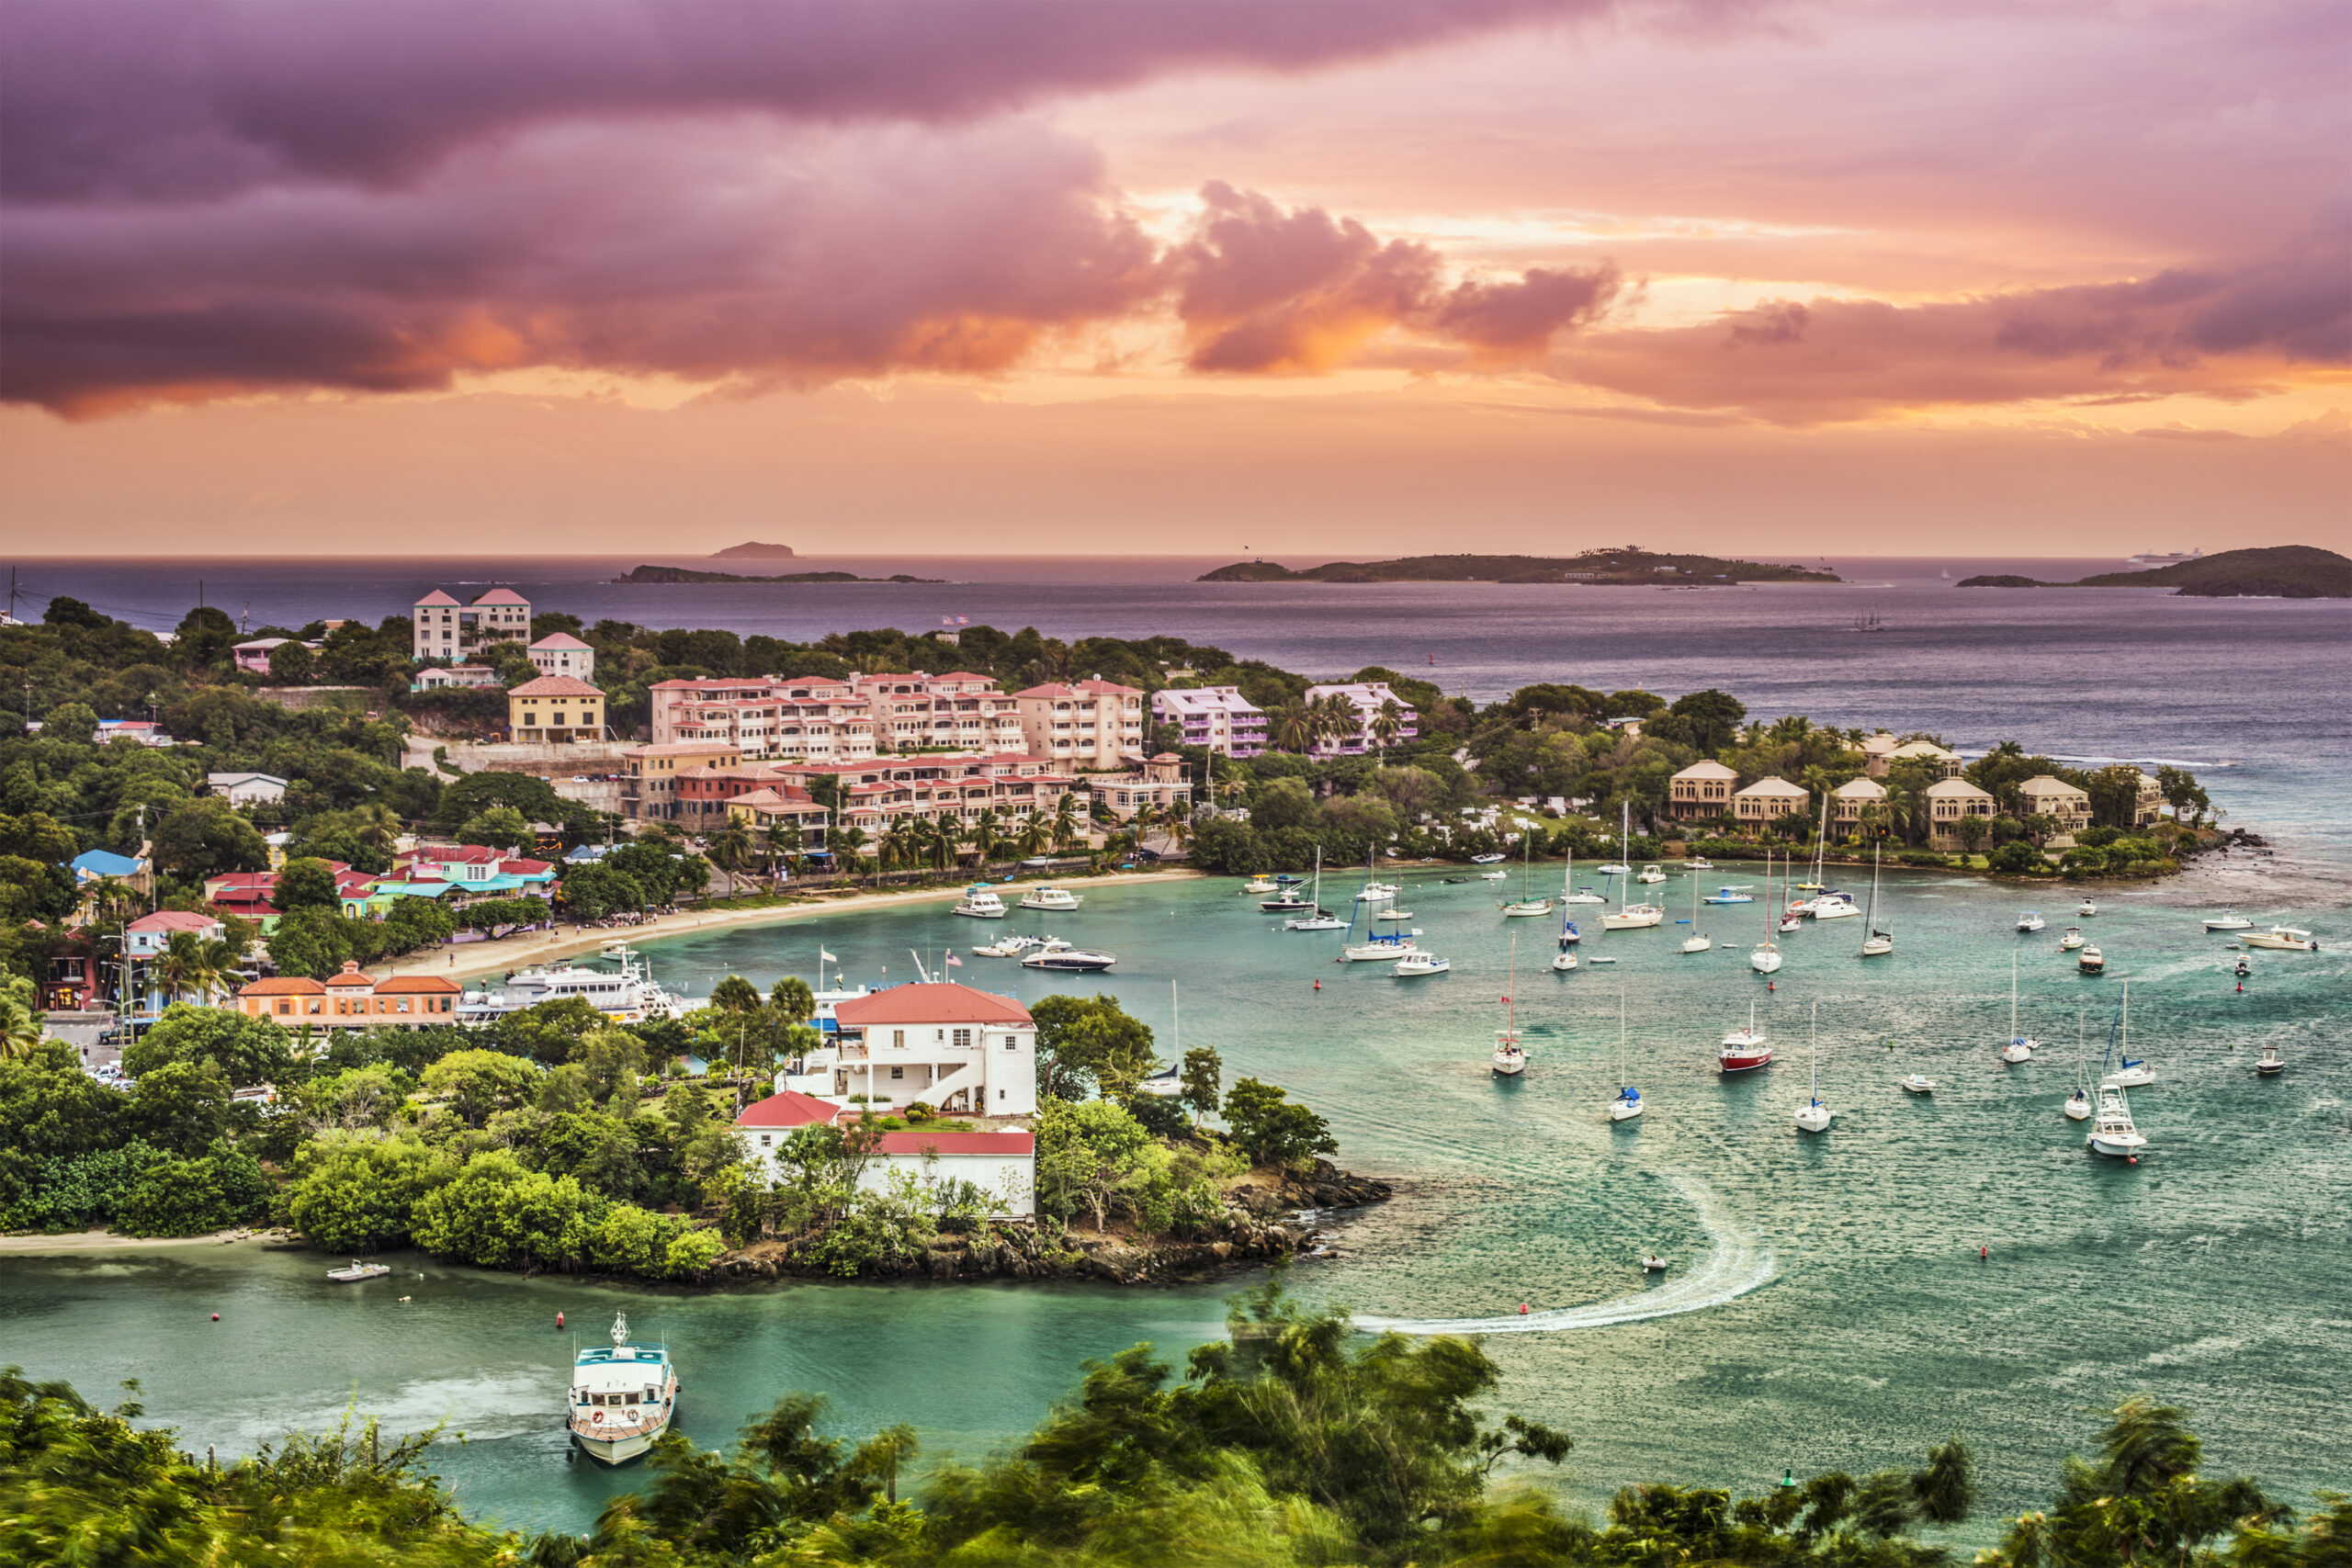 The best time to visit St. Thomas and tour options